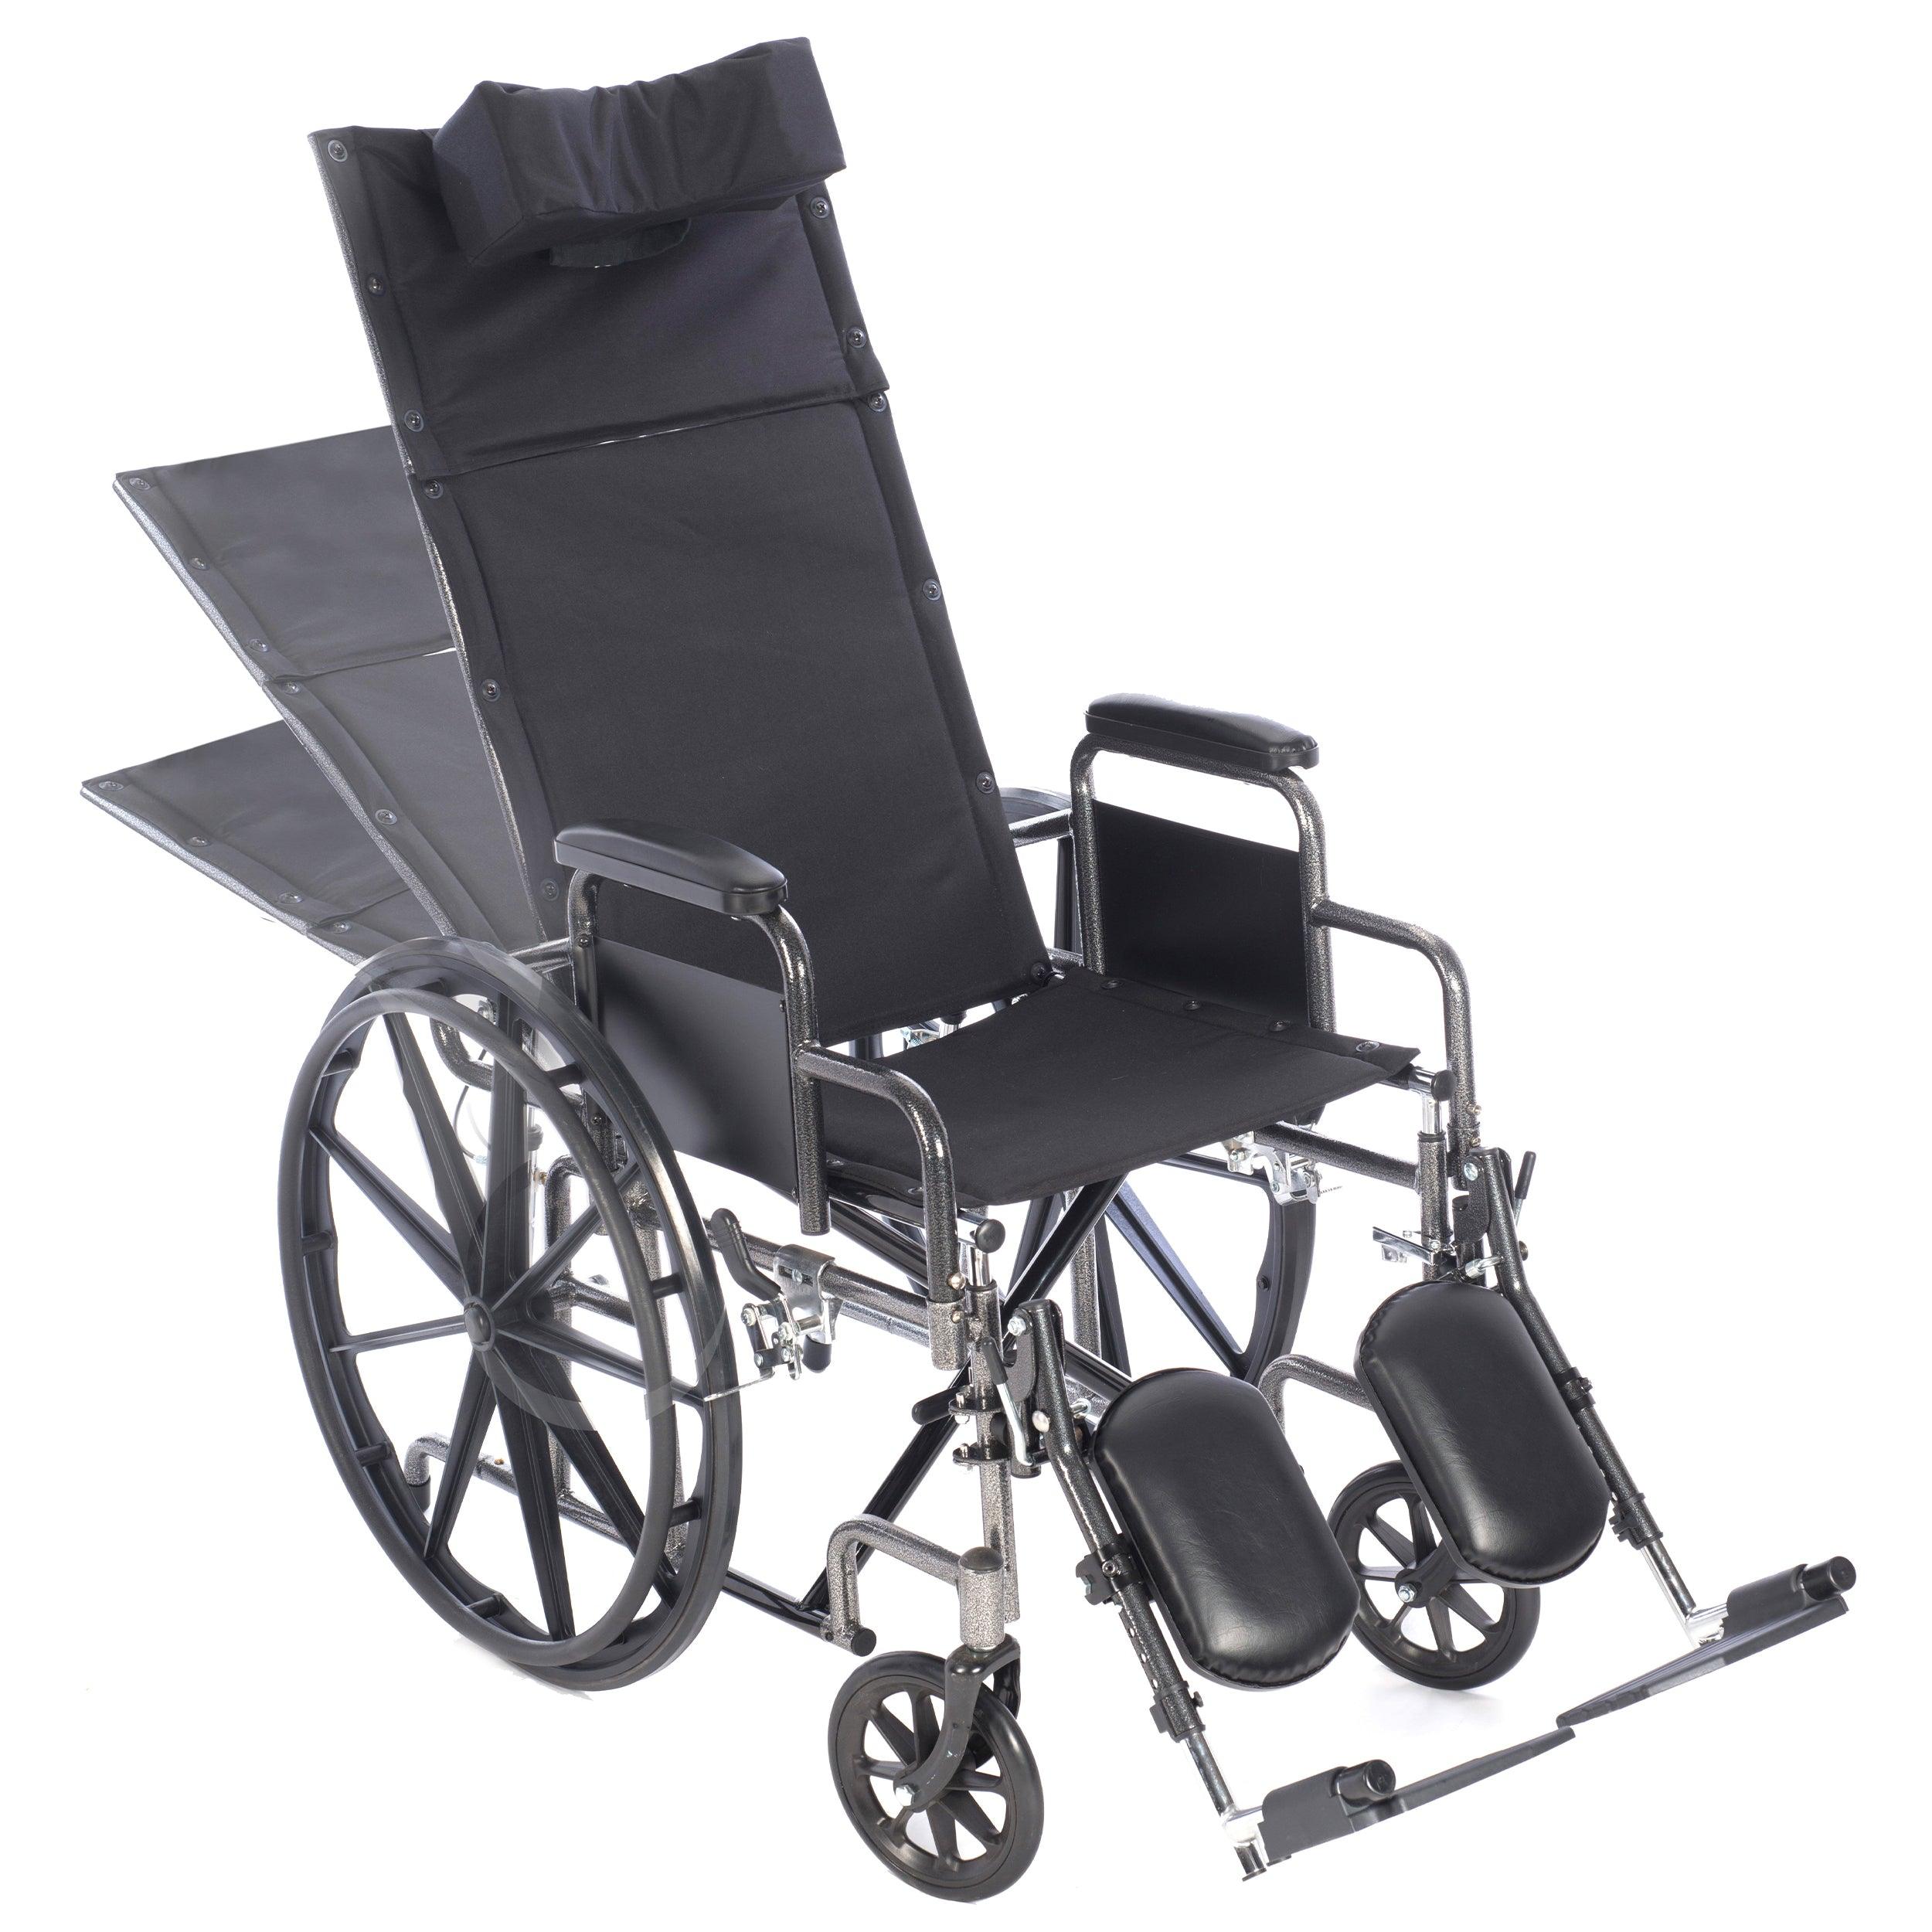 Wheelchair Elevating Legrests ，Composite Footplates with Padded Calf  Supports,for Standard Wheelchairs,1 Pair